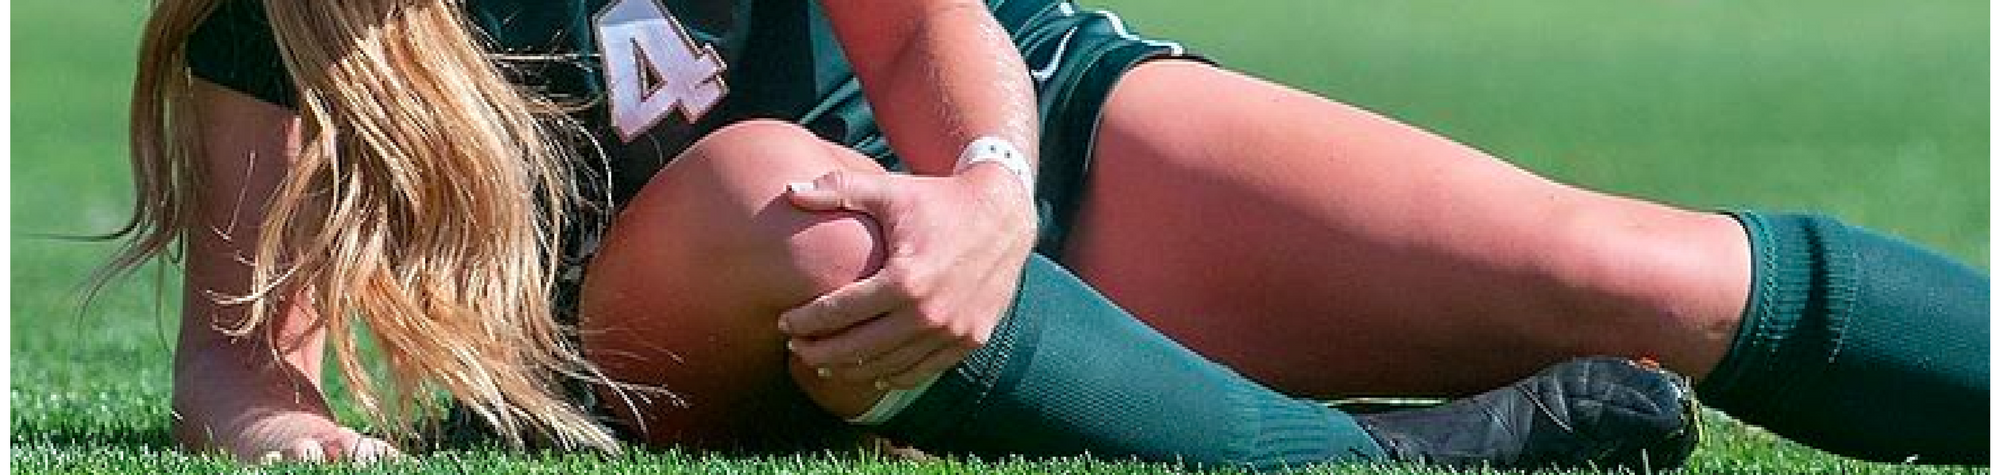 Anterior Cruciate Ligament (ACL) injury